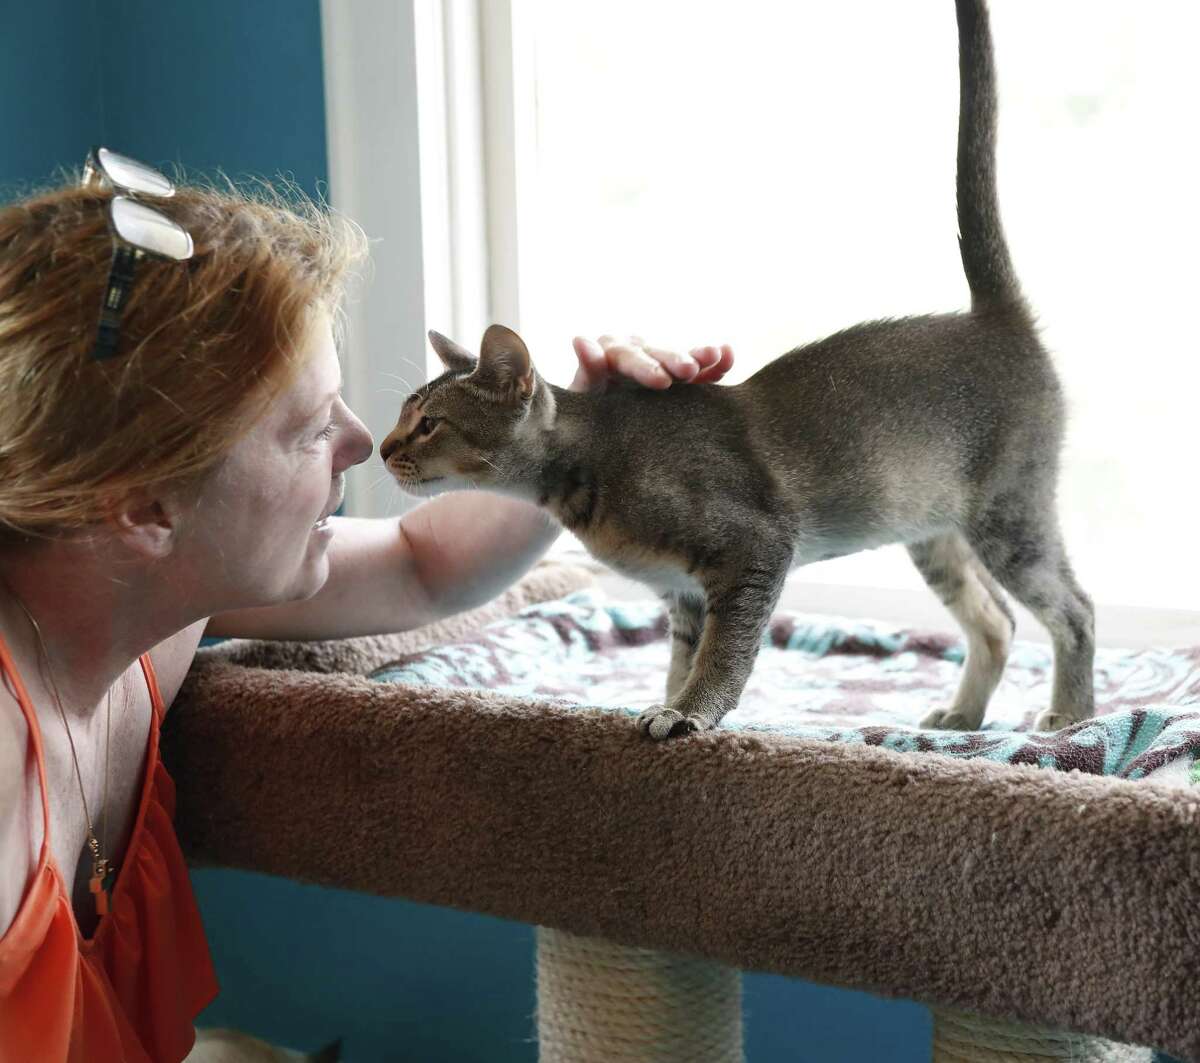 Brenda Fraley, who runs the at Save a Purrfect Cat Rescue, talks to Mason, a little Abyssinian kitten, in River Oaks, May 28, 2019.